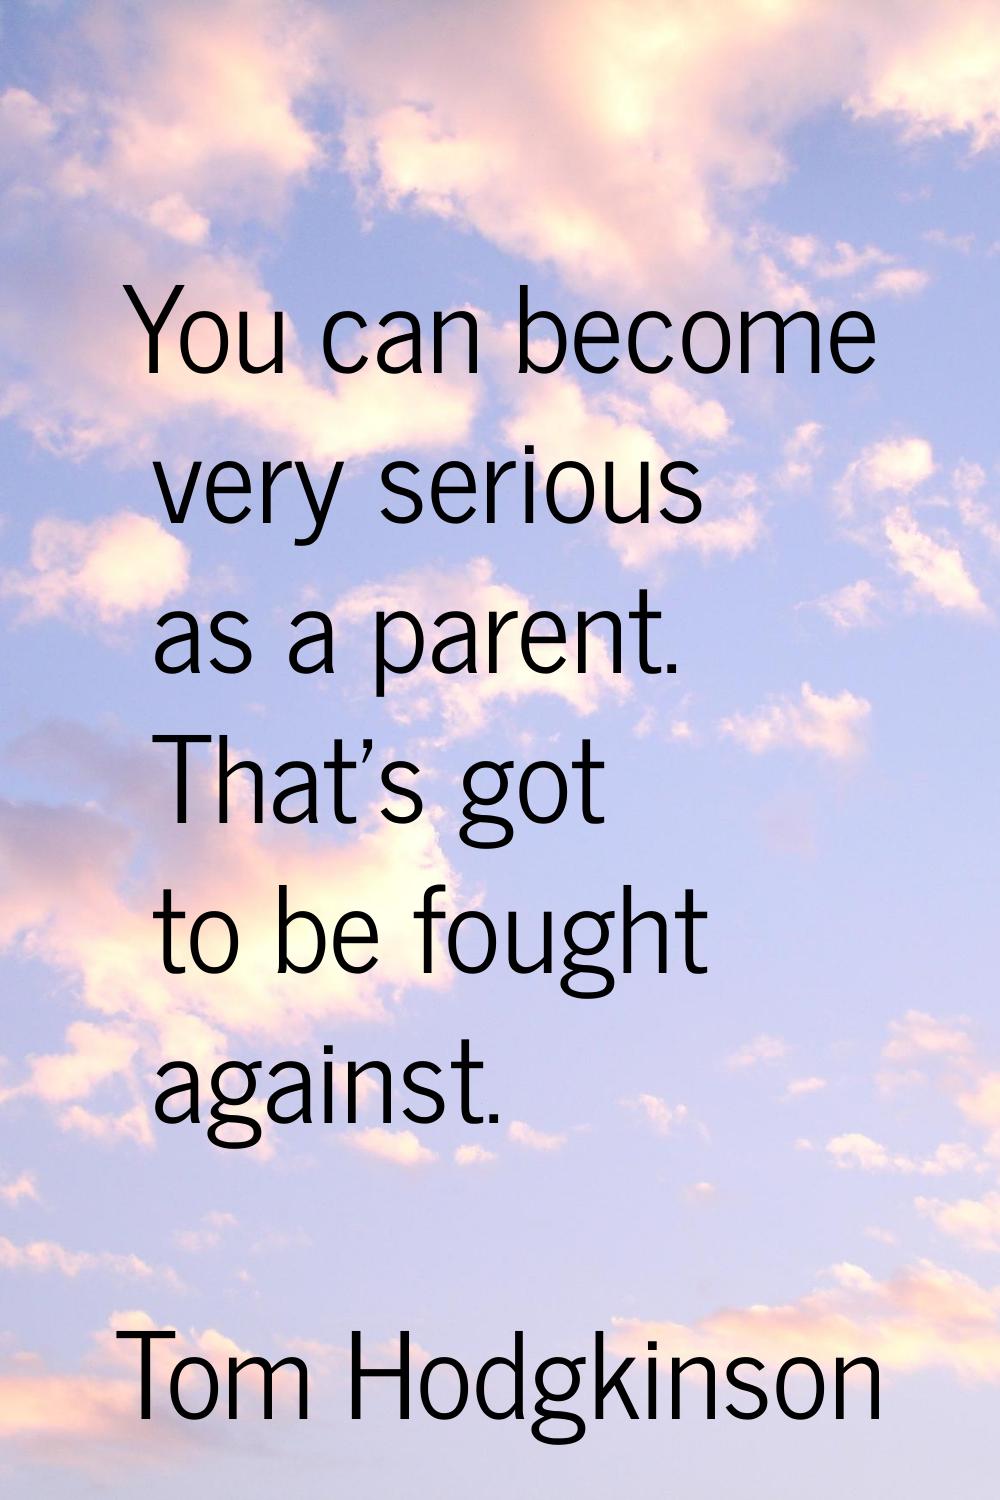 You can become very serious as a parent. That's got to be fought against.